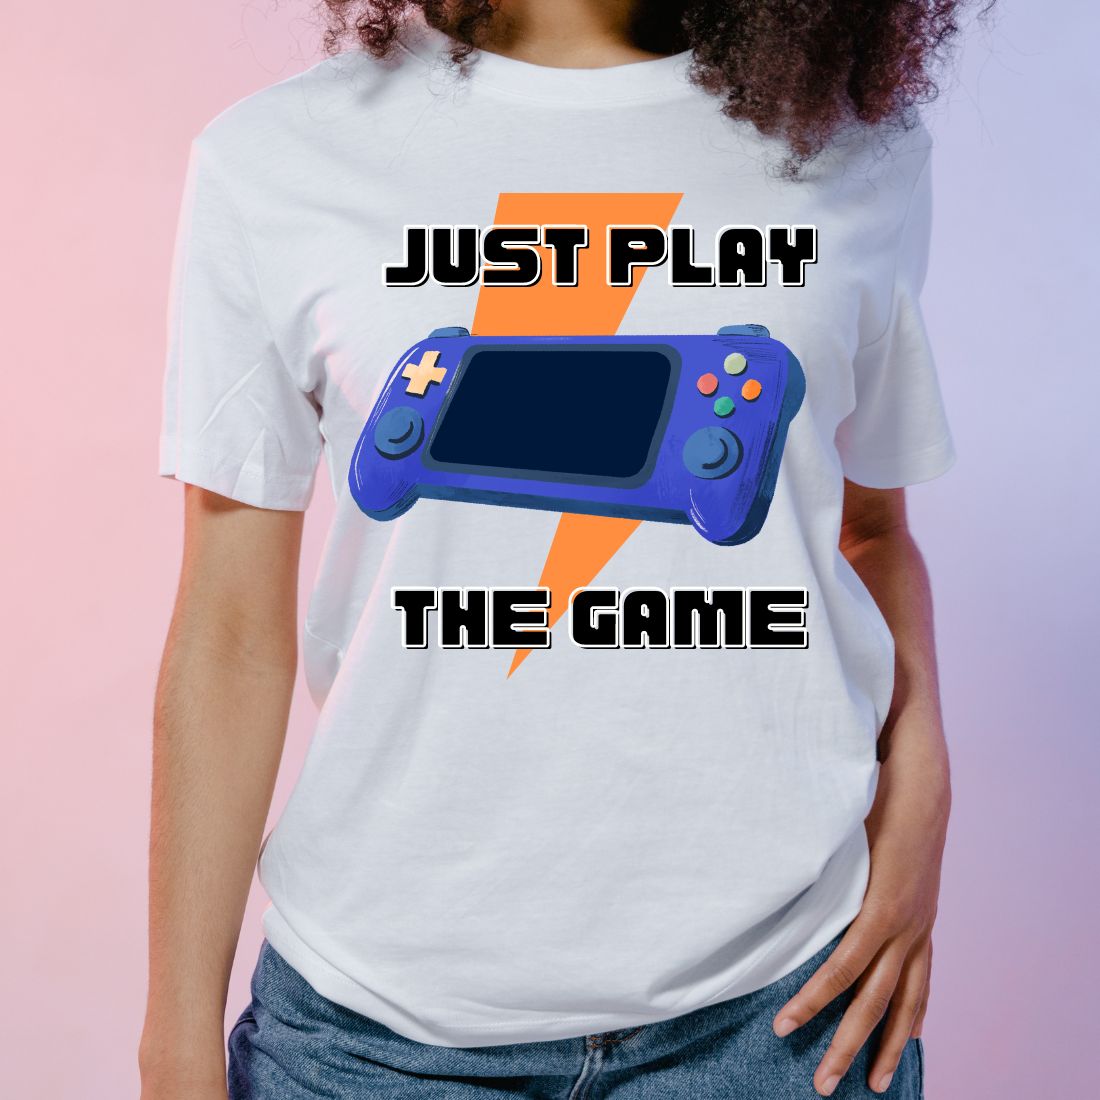 Just play the game t-shirt design cover image.